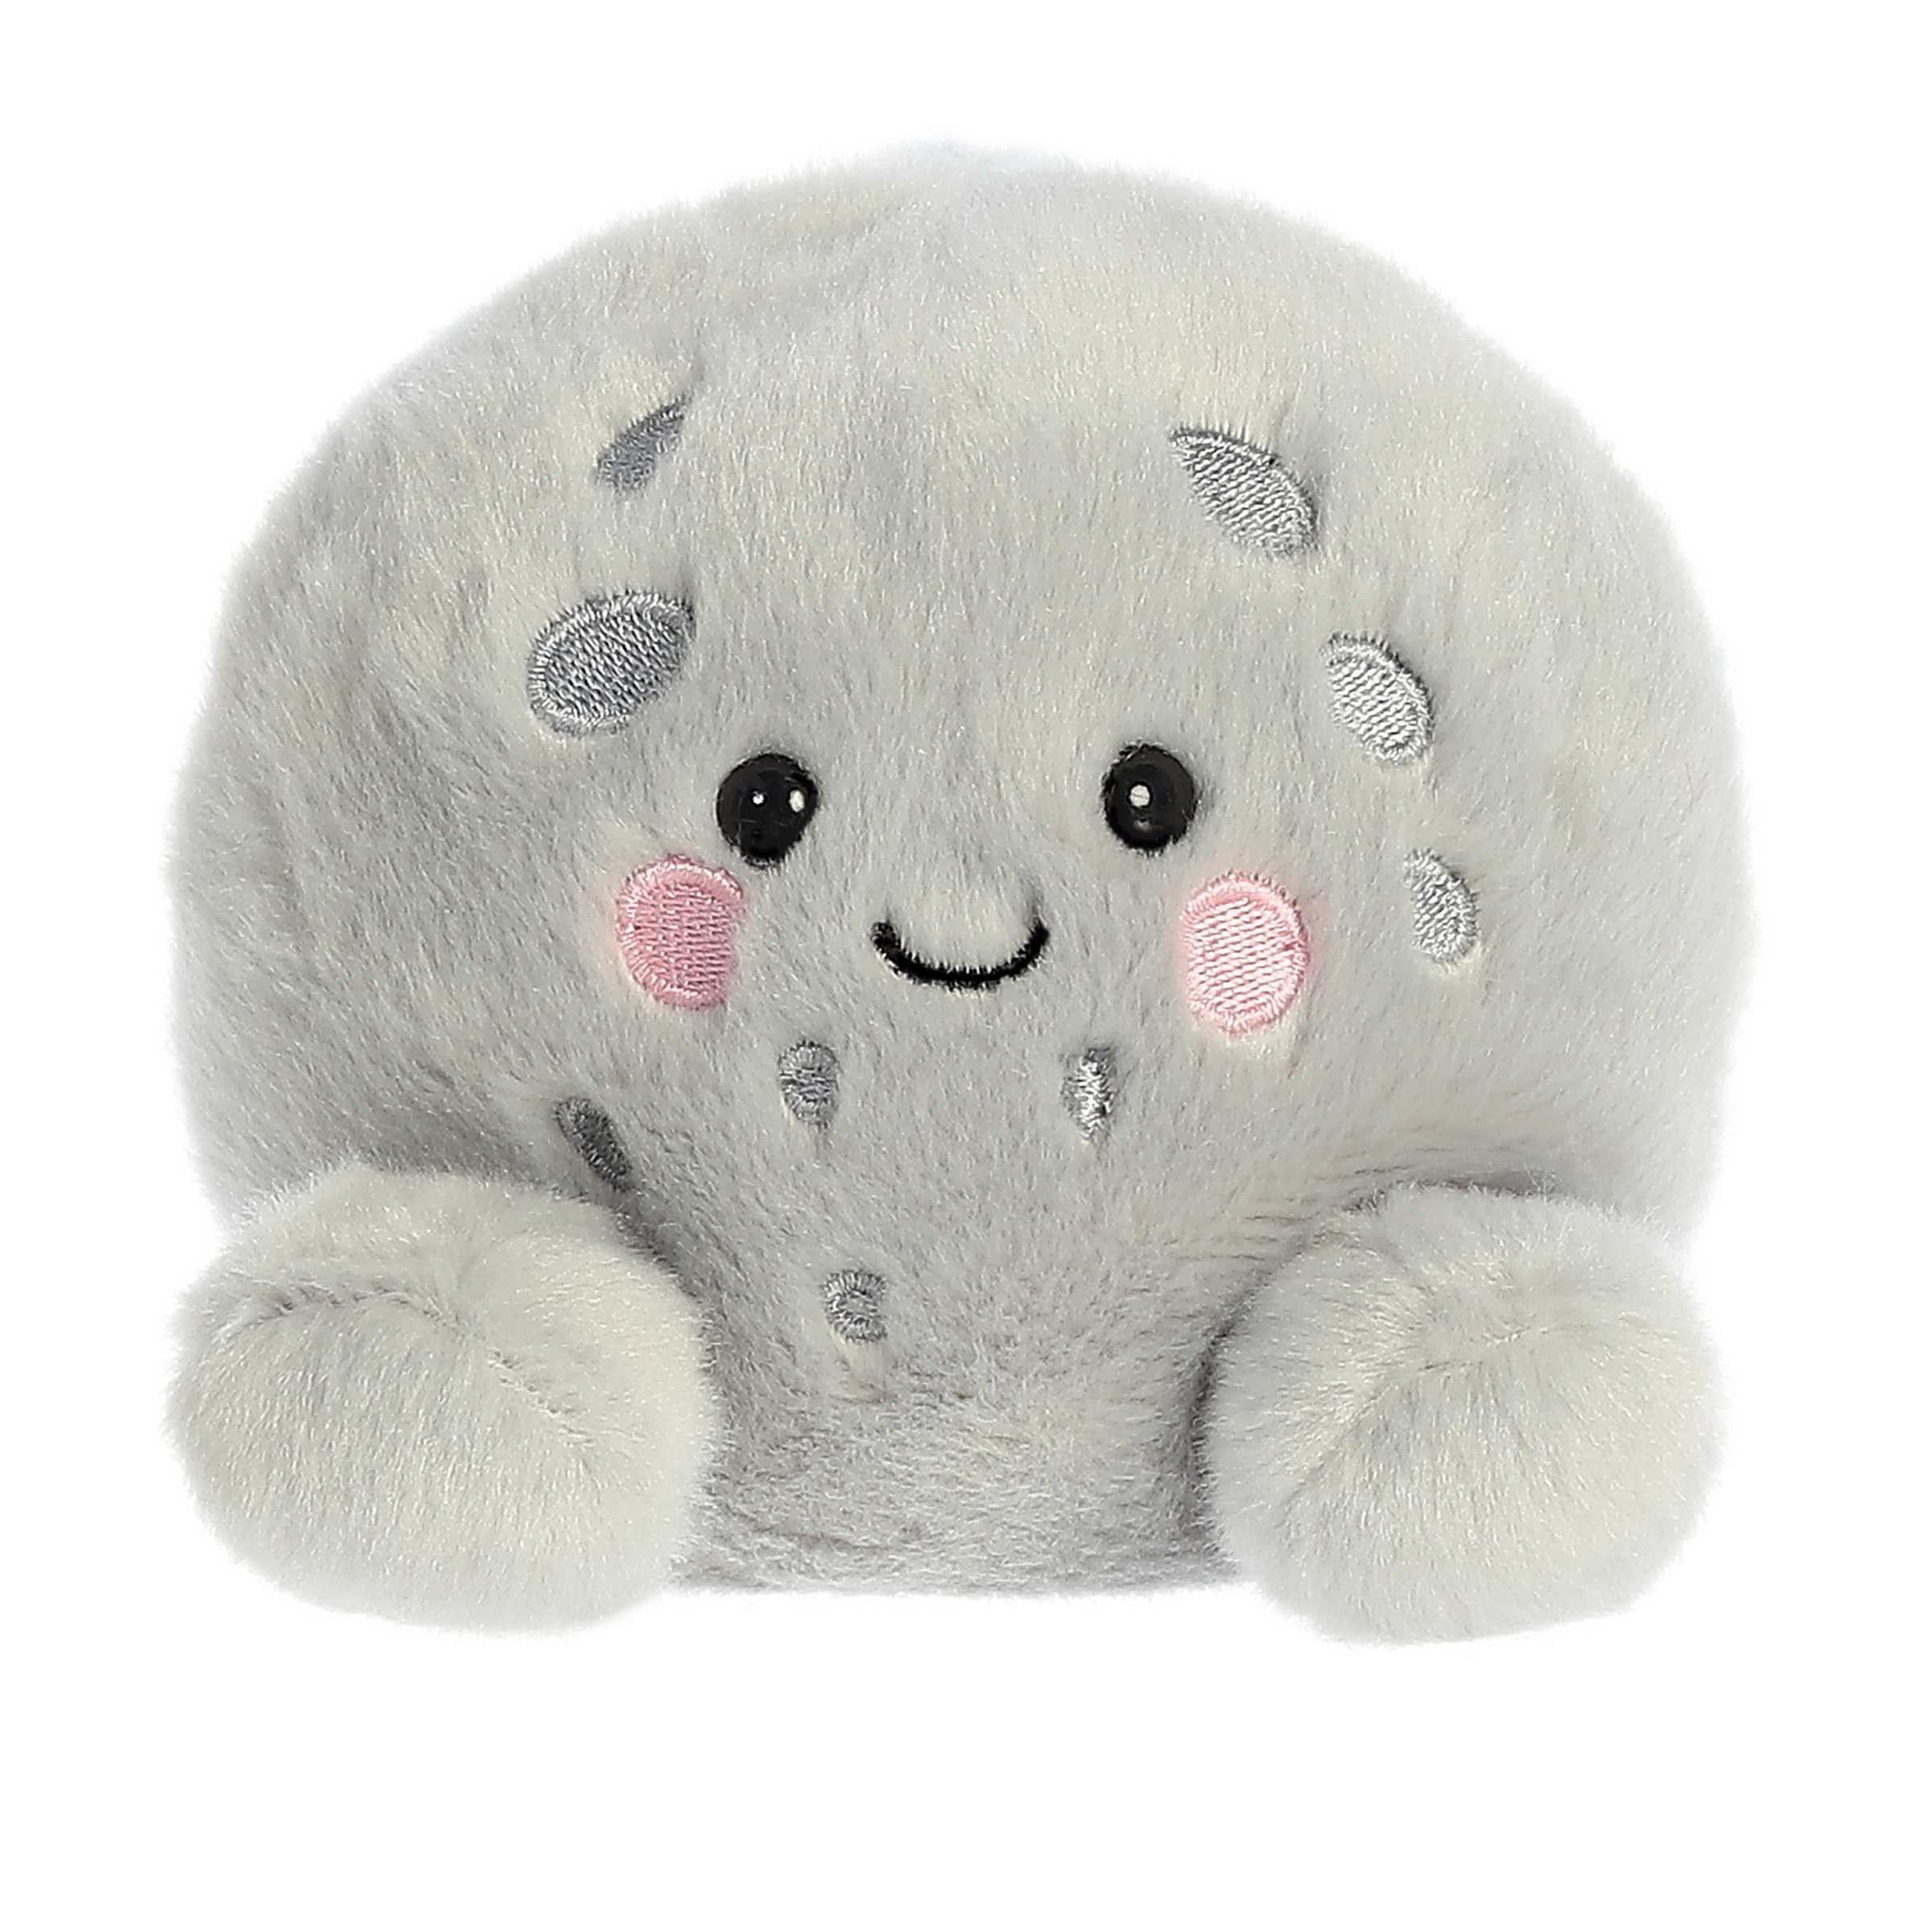 Soft tiny moon plush with light gray body and bean pellets filled inside, and a smiling face with pink and gray embroidery